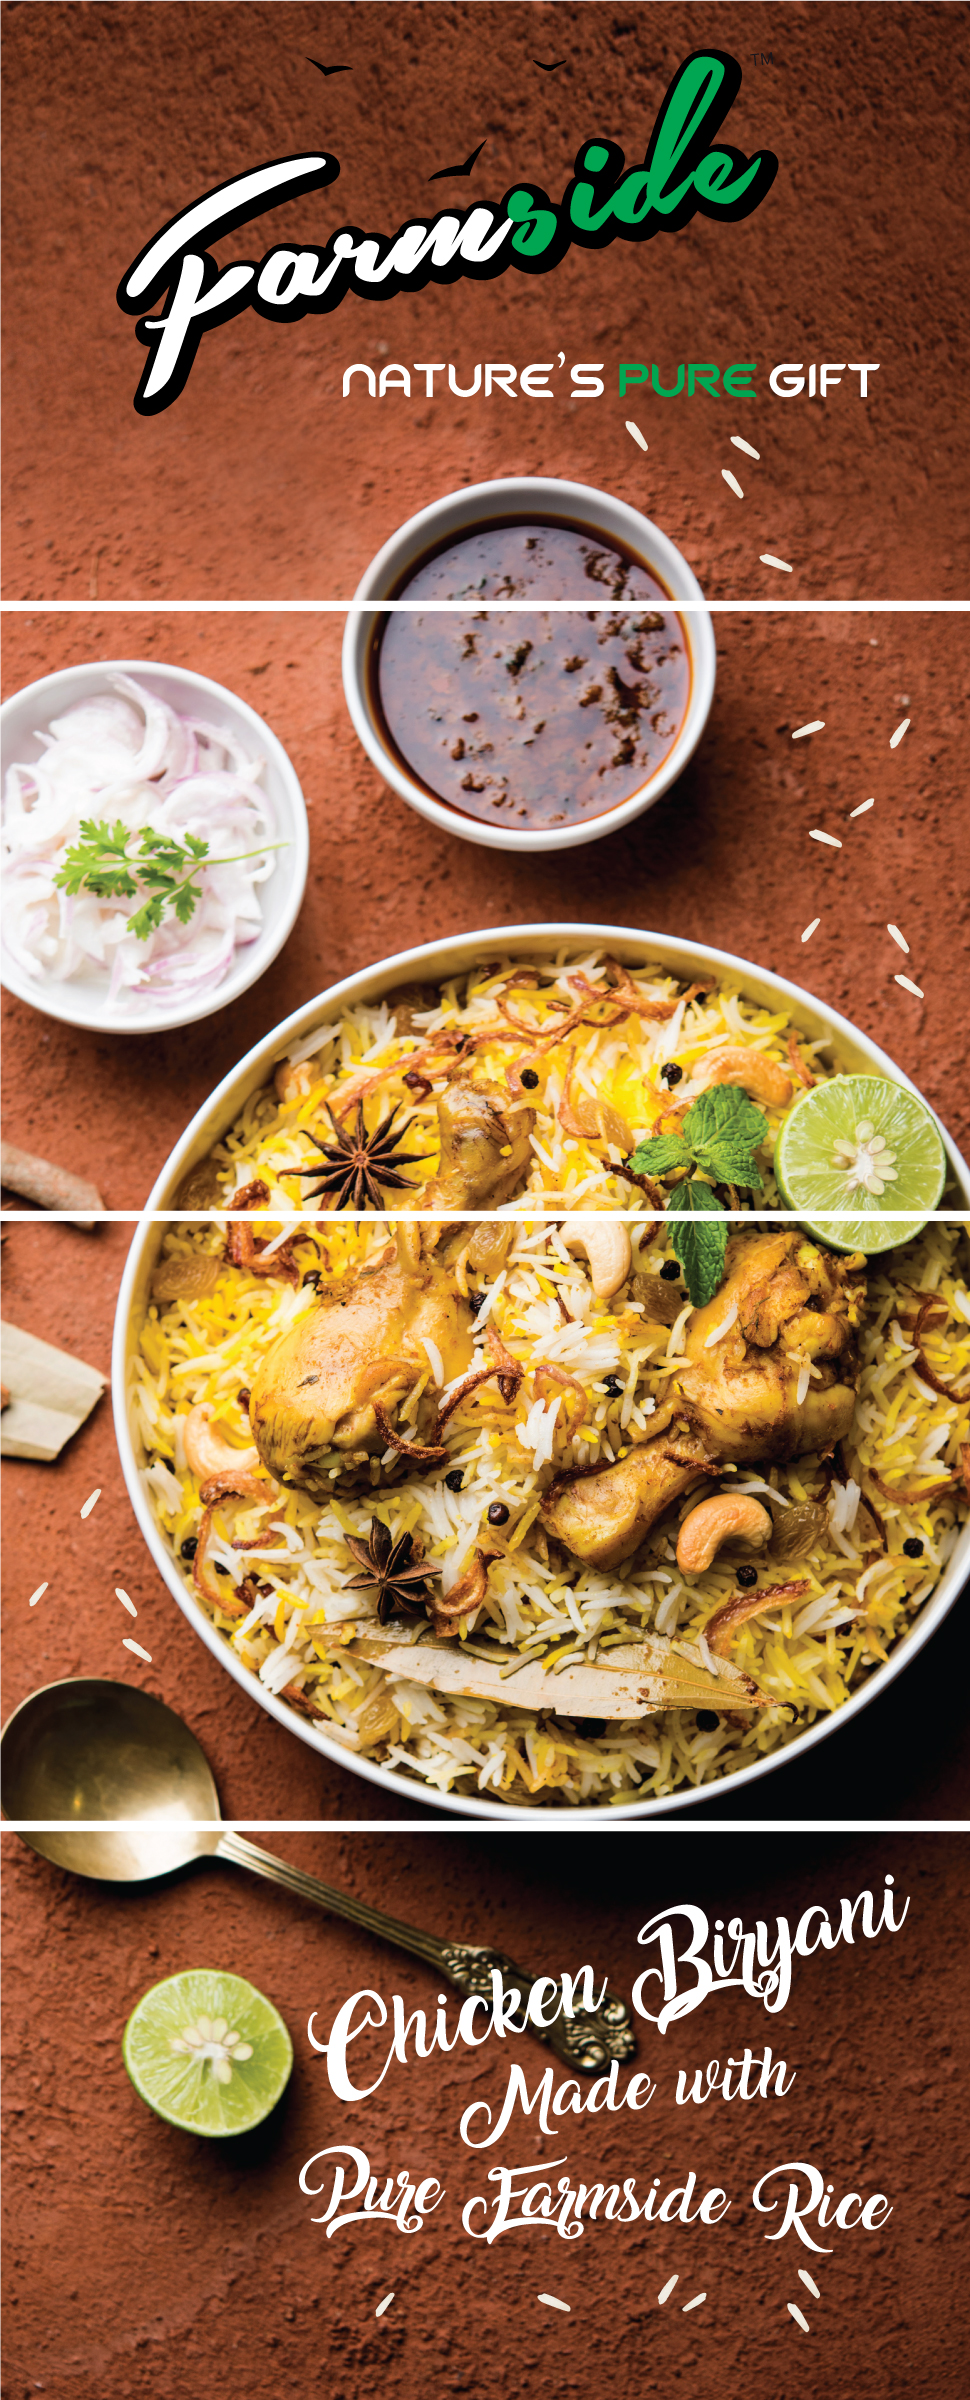 Image of A-Plus Content of Premium Basmati Rice from Farmside with a picture of chicken biryani served in a bowl 